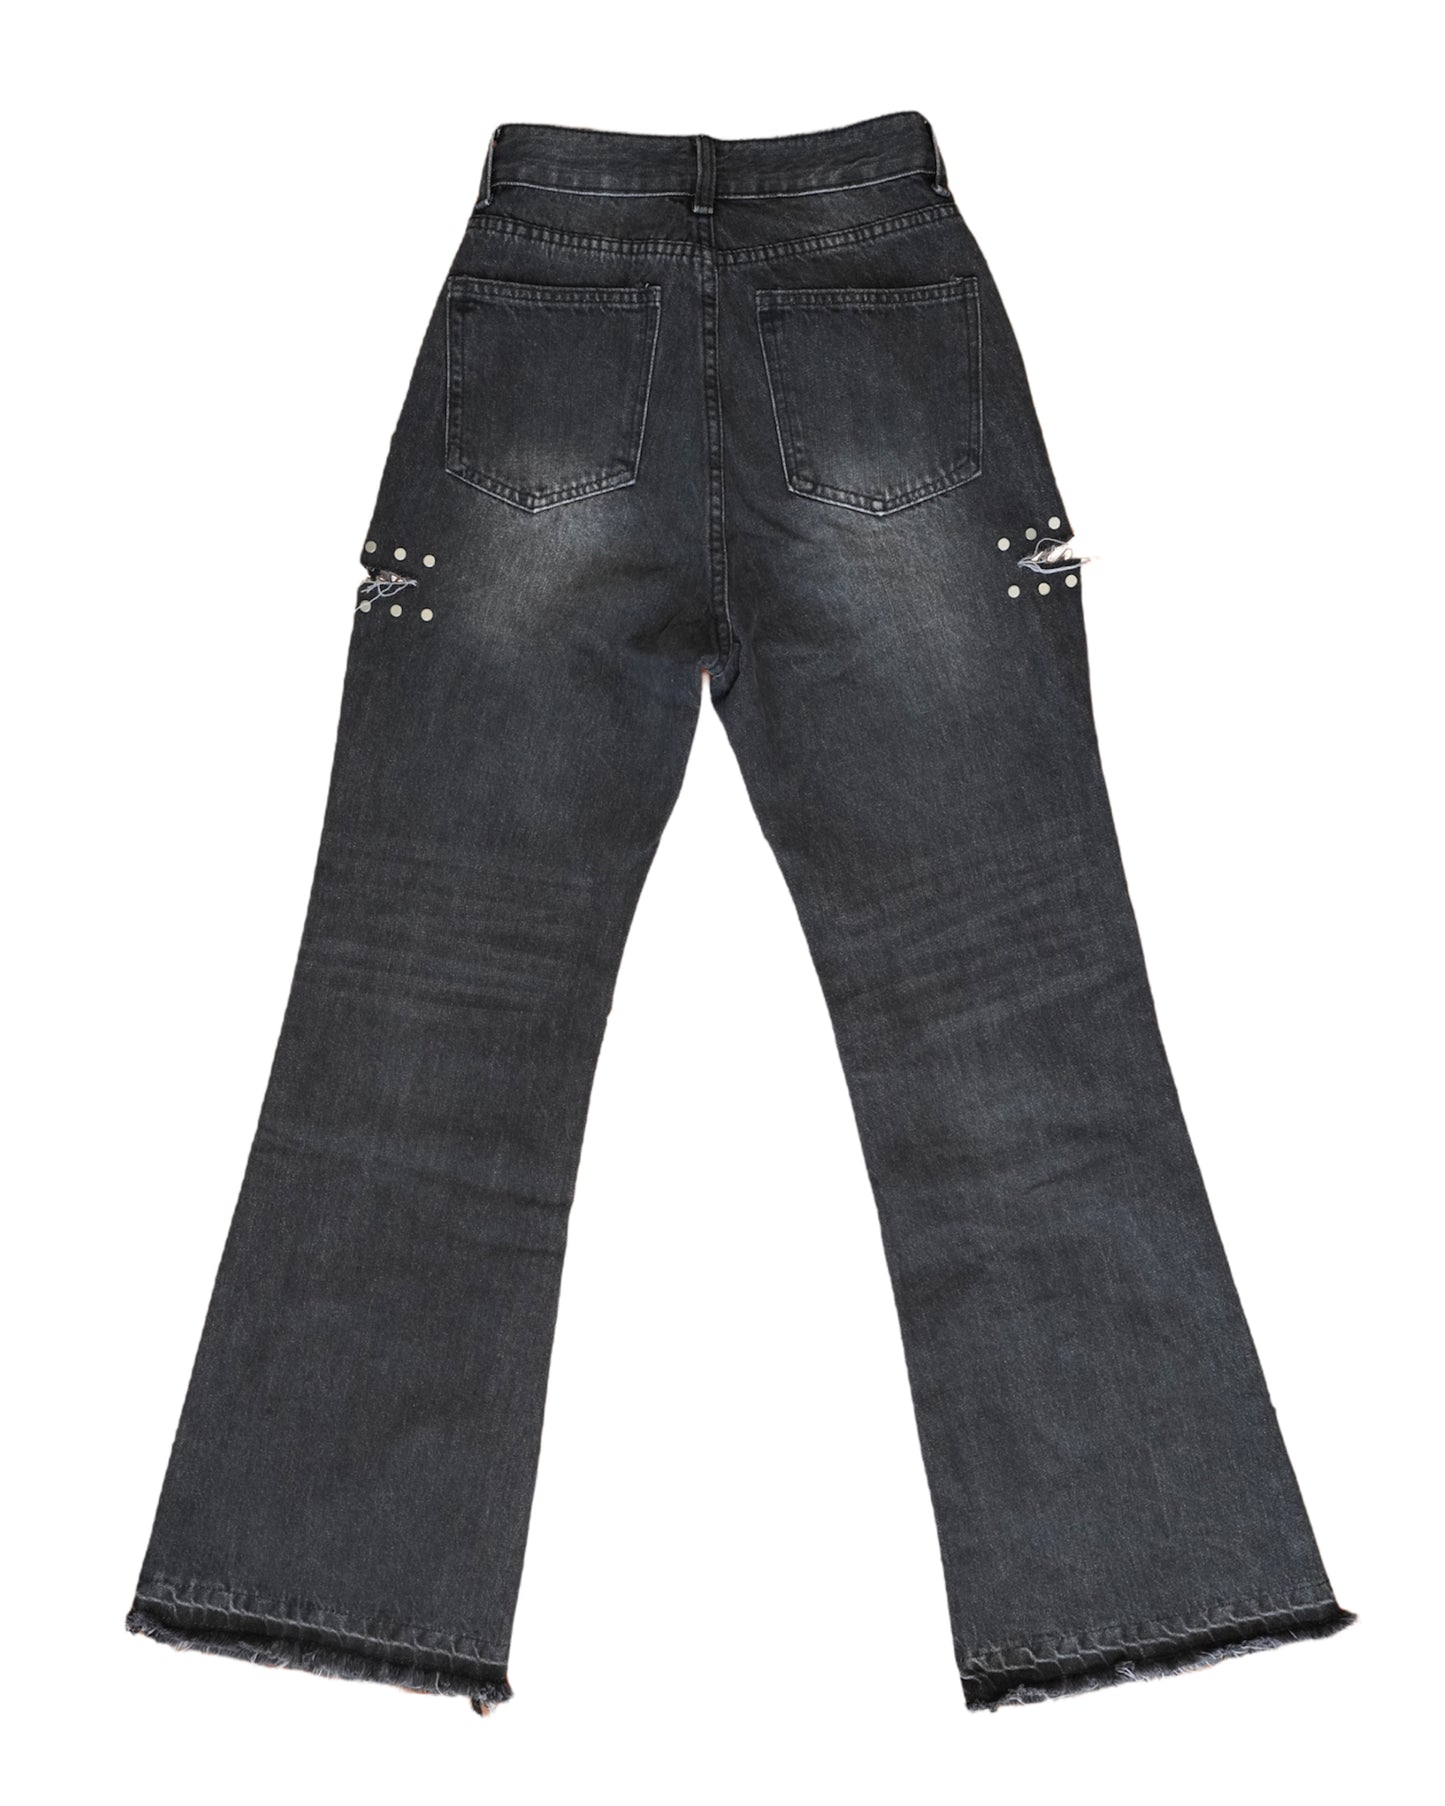 Raw edge cut out jeans